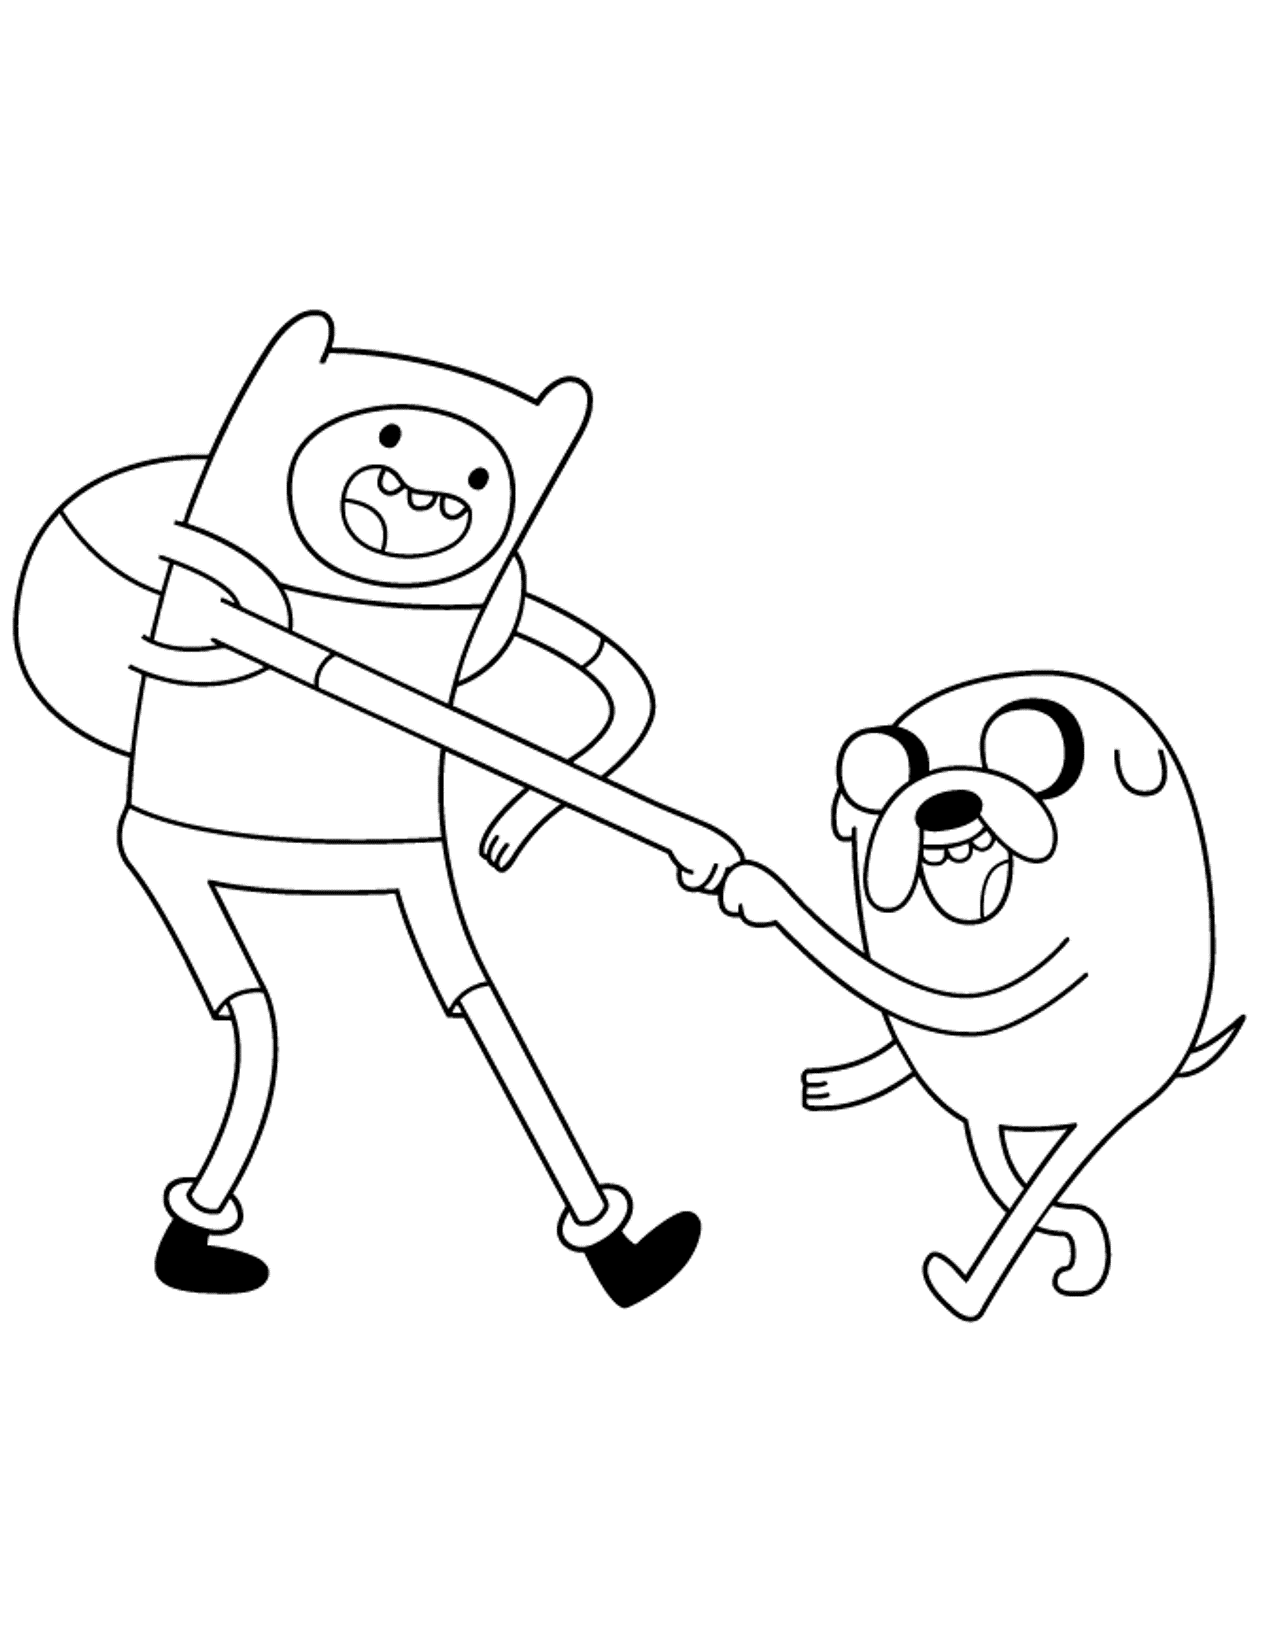 Adventure Time Coloring Pages Finn | Cartoon Coloring pages of ...